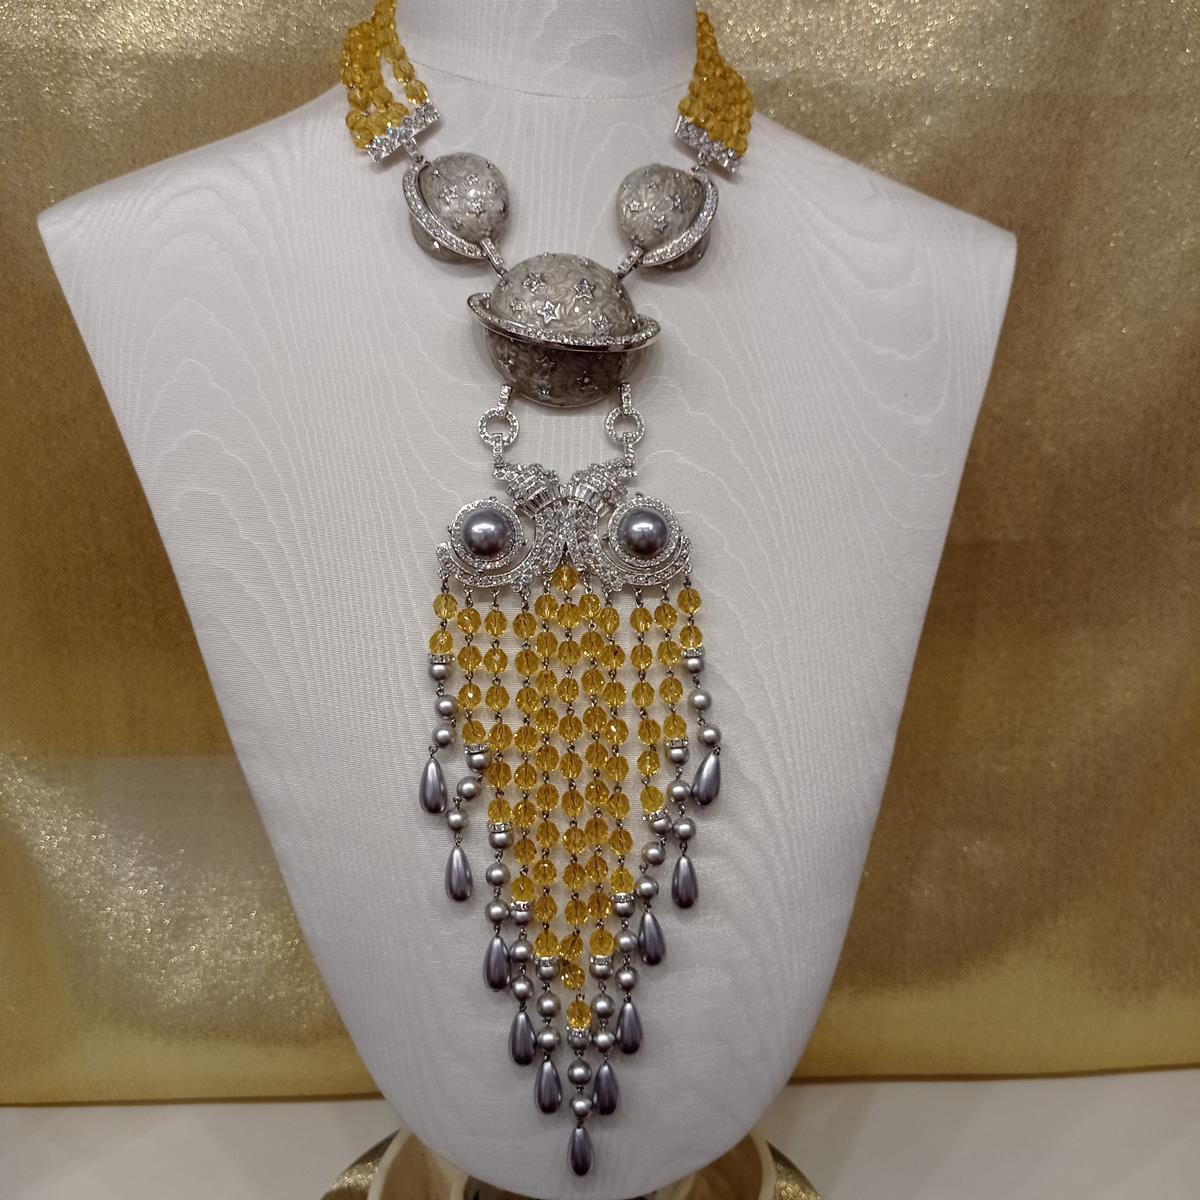 Fantastic masterpiece by Carlo Zini
One of the world greatest bijoux designers
Maxi necklace
Saturn theme
Grey elements and faux pearls
Swarovski crystals
Faceted citrine colored crystals
Non allergenic rhodium
100% Artisanal work made in